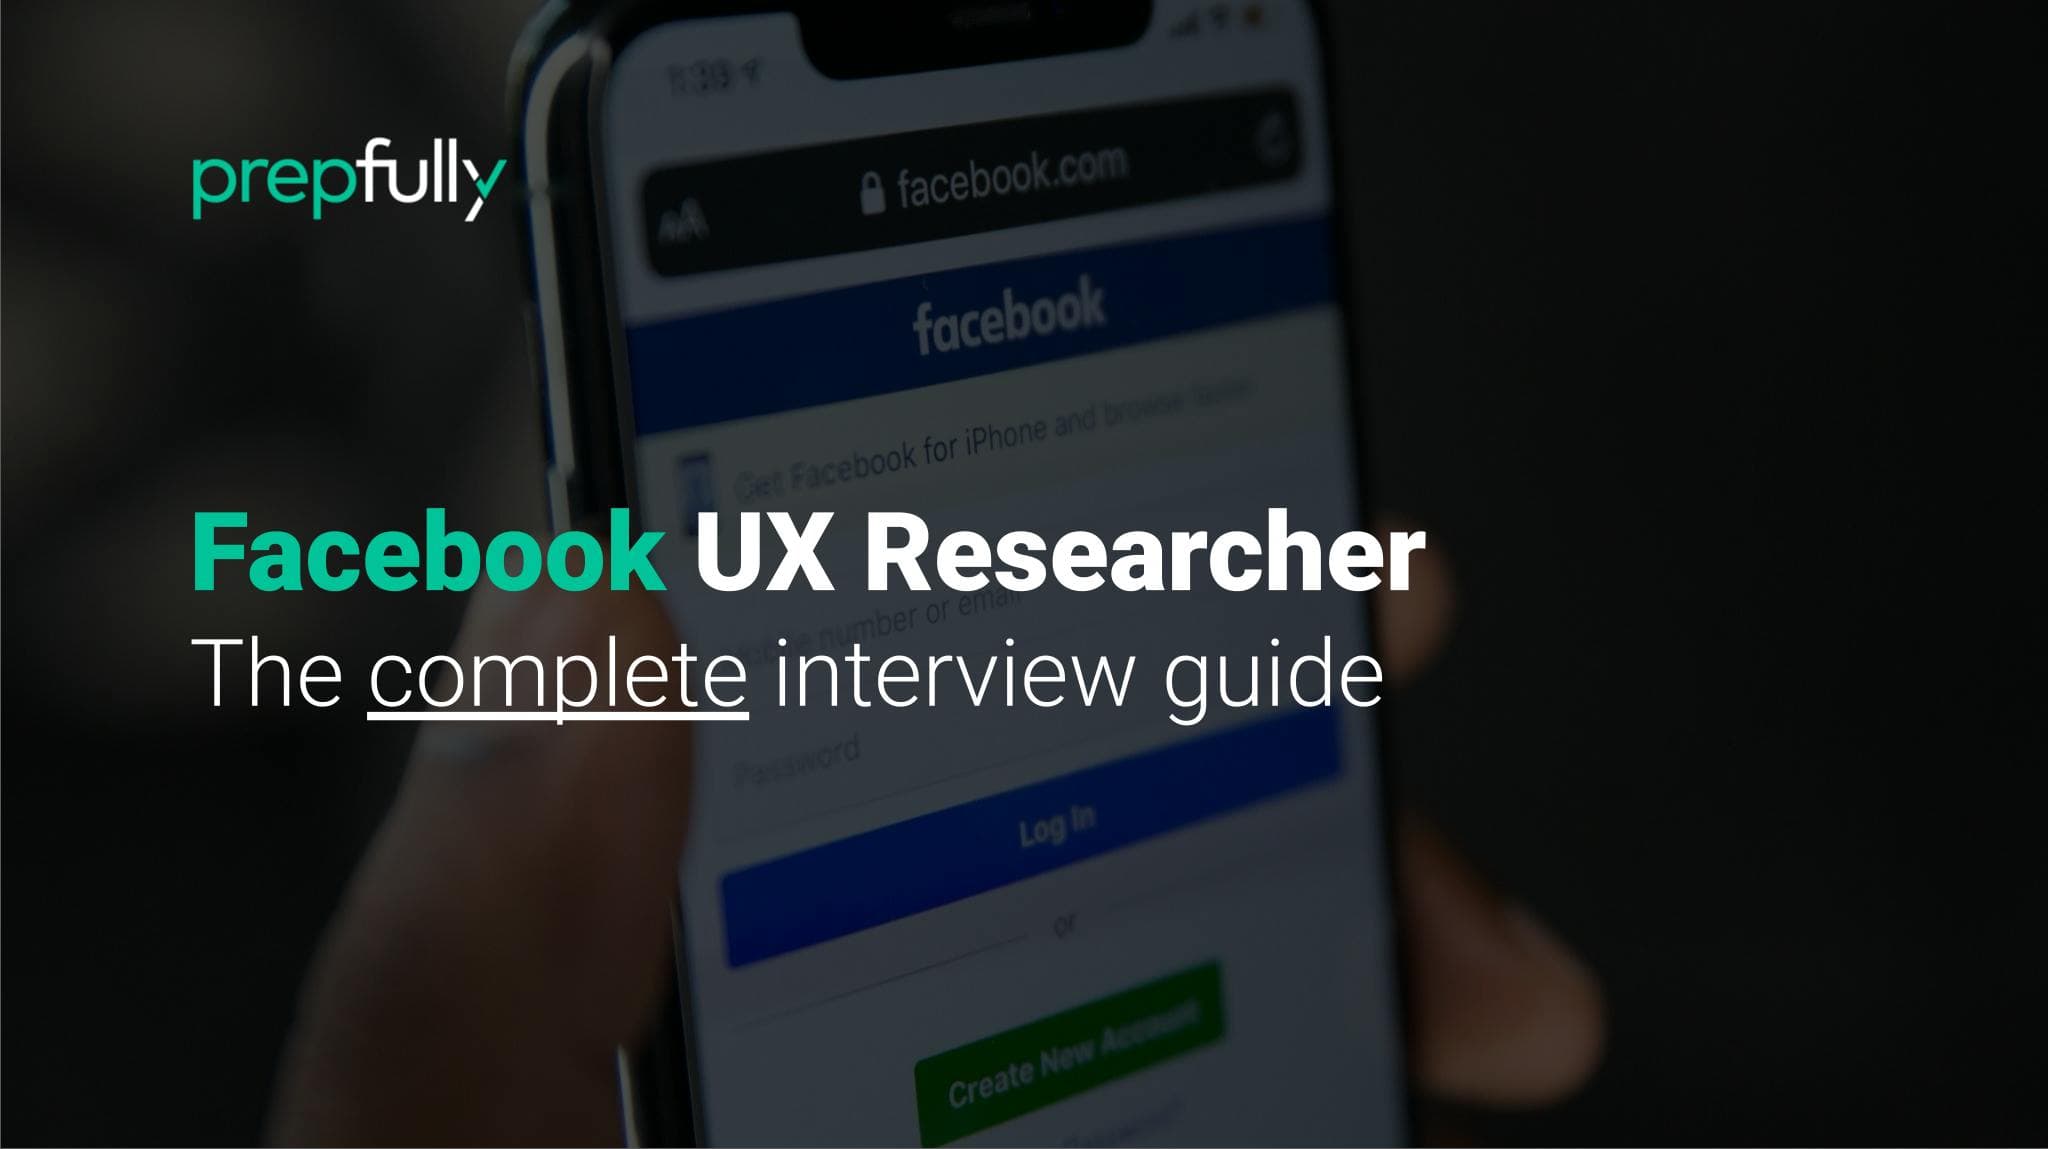 Interview guide for Facebook UX Researcher